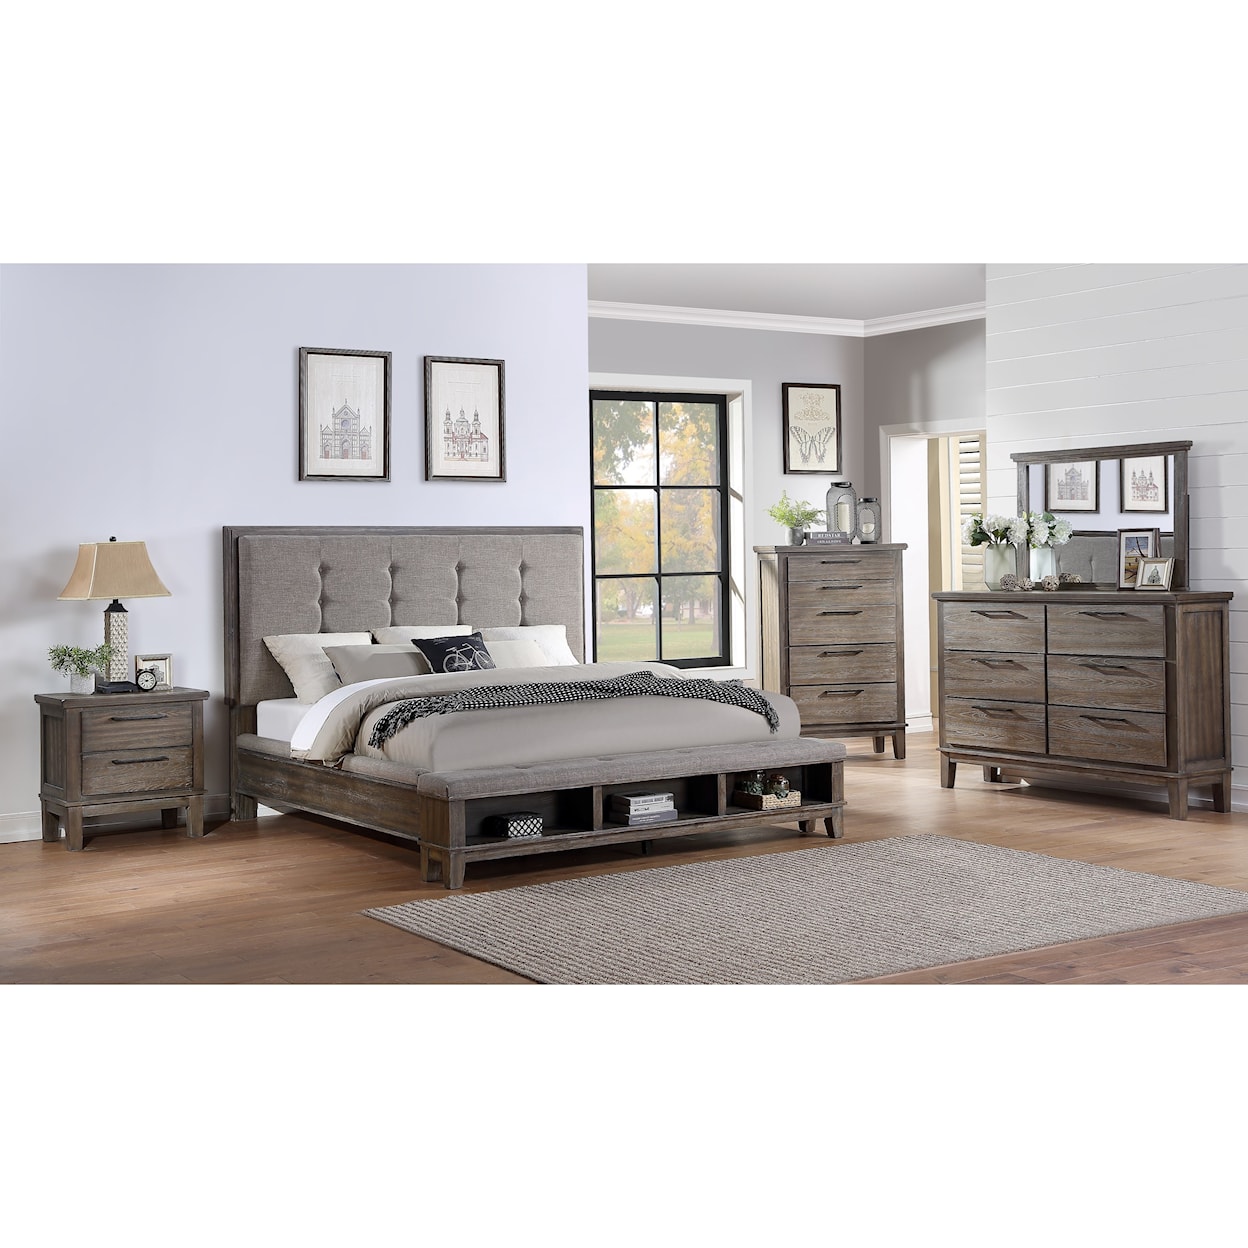 New Classic Cagney California King Bedroom Group